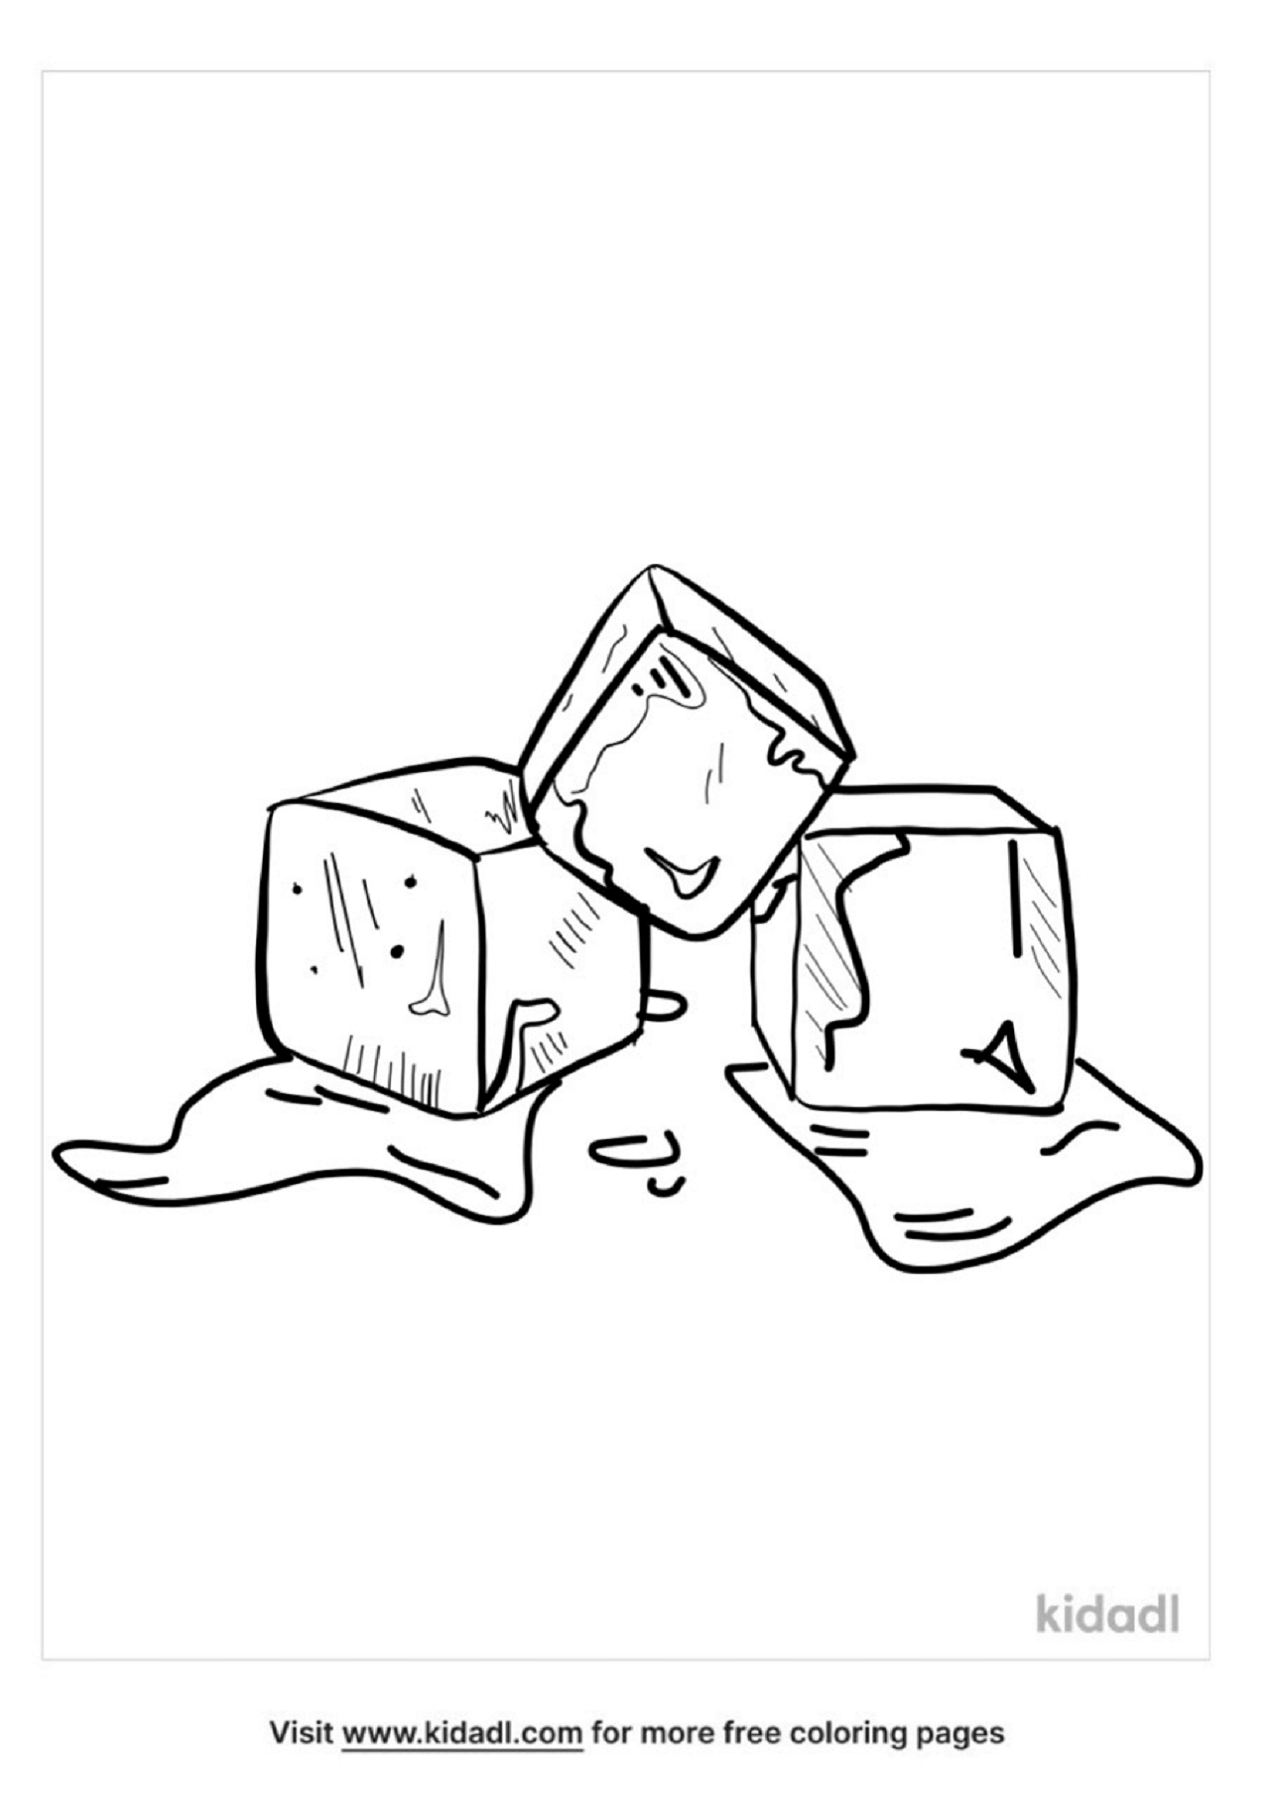 Ice Cube Coloring Pages | Free Food Coloring Pages | Kidadl